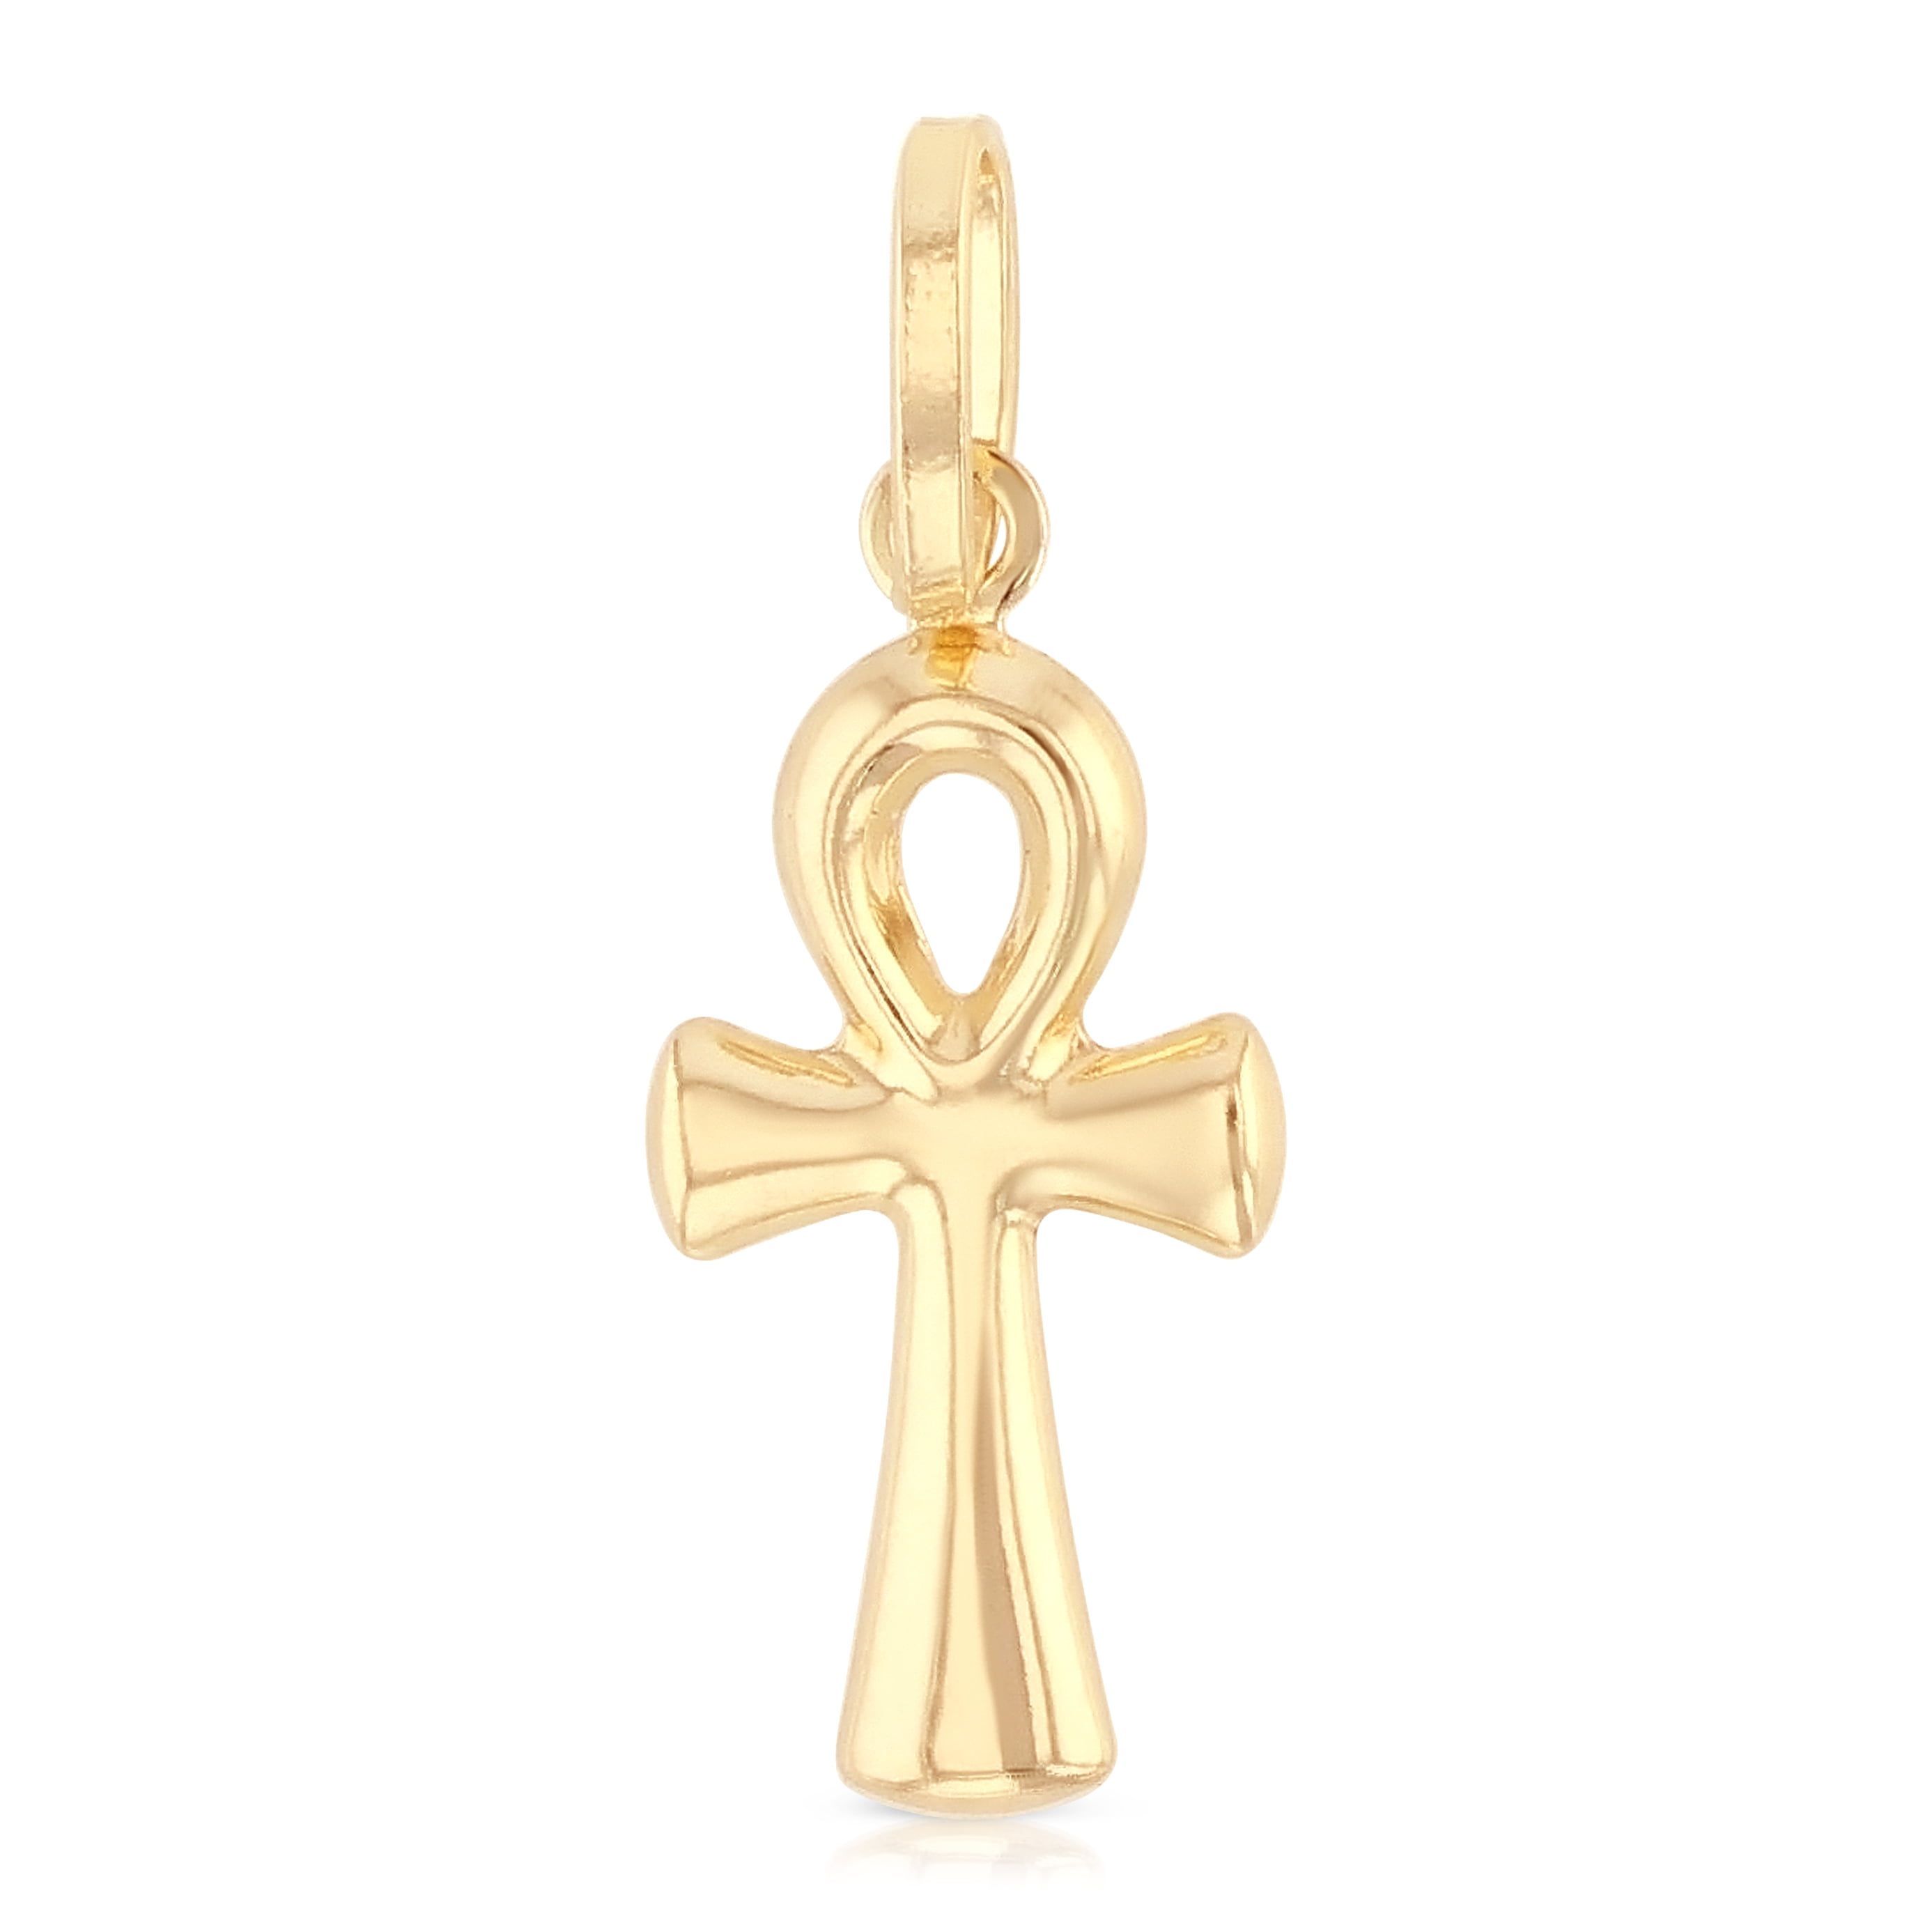 Solid Gold 0.5 grams 14KY Ankh Cross Religious Pendant Yellow